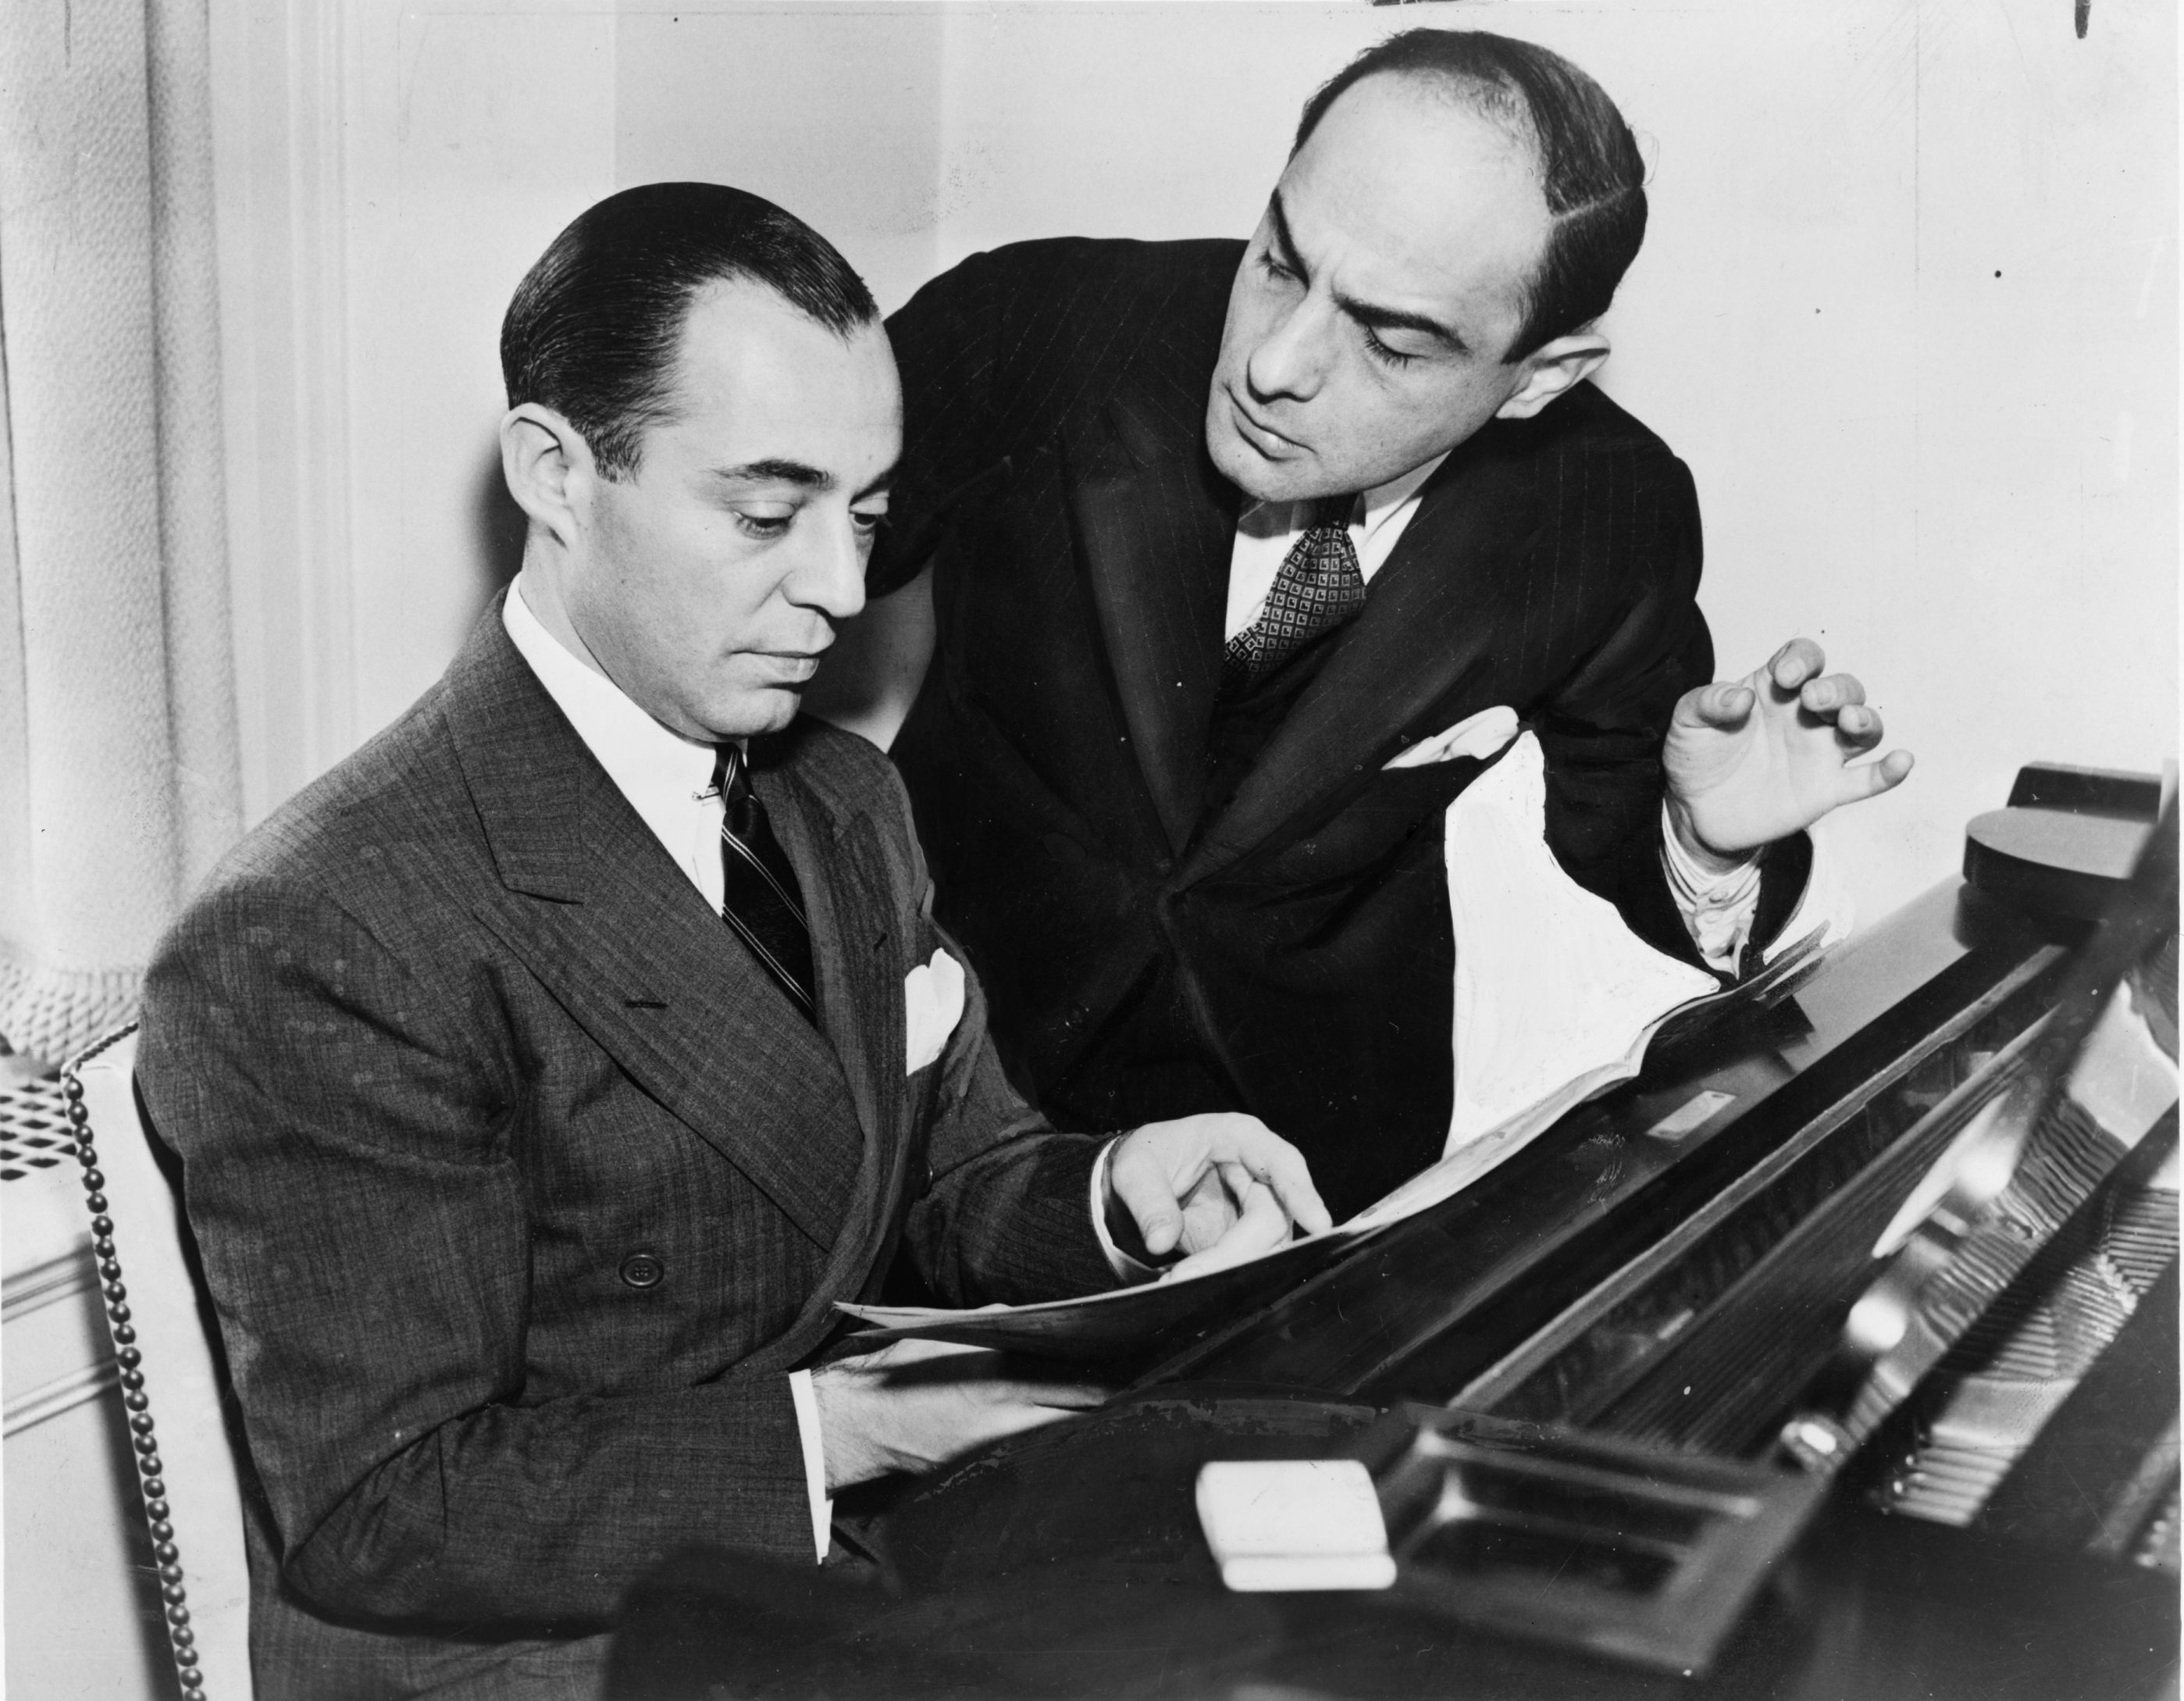 Legendary American song composers Richard Rodgers and Lorenz Hart